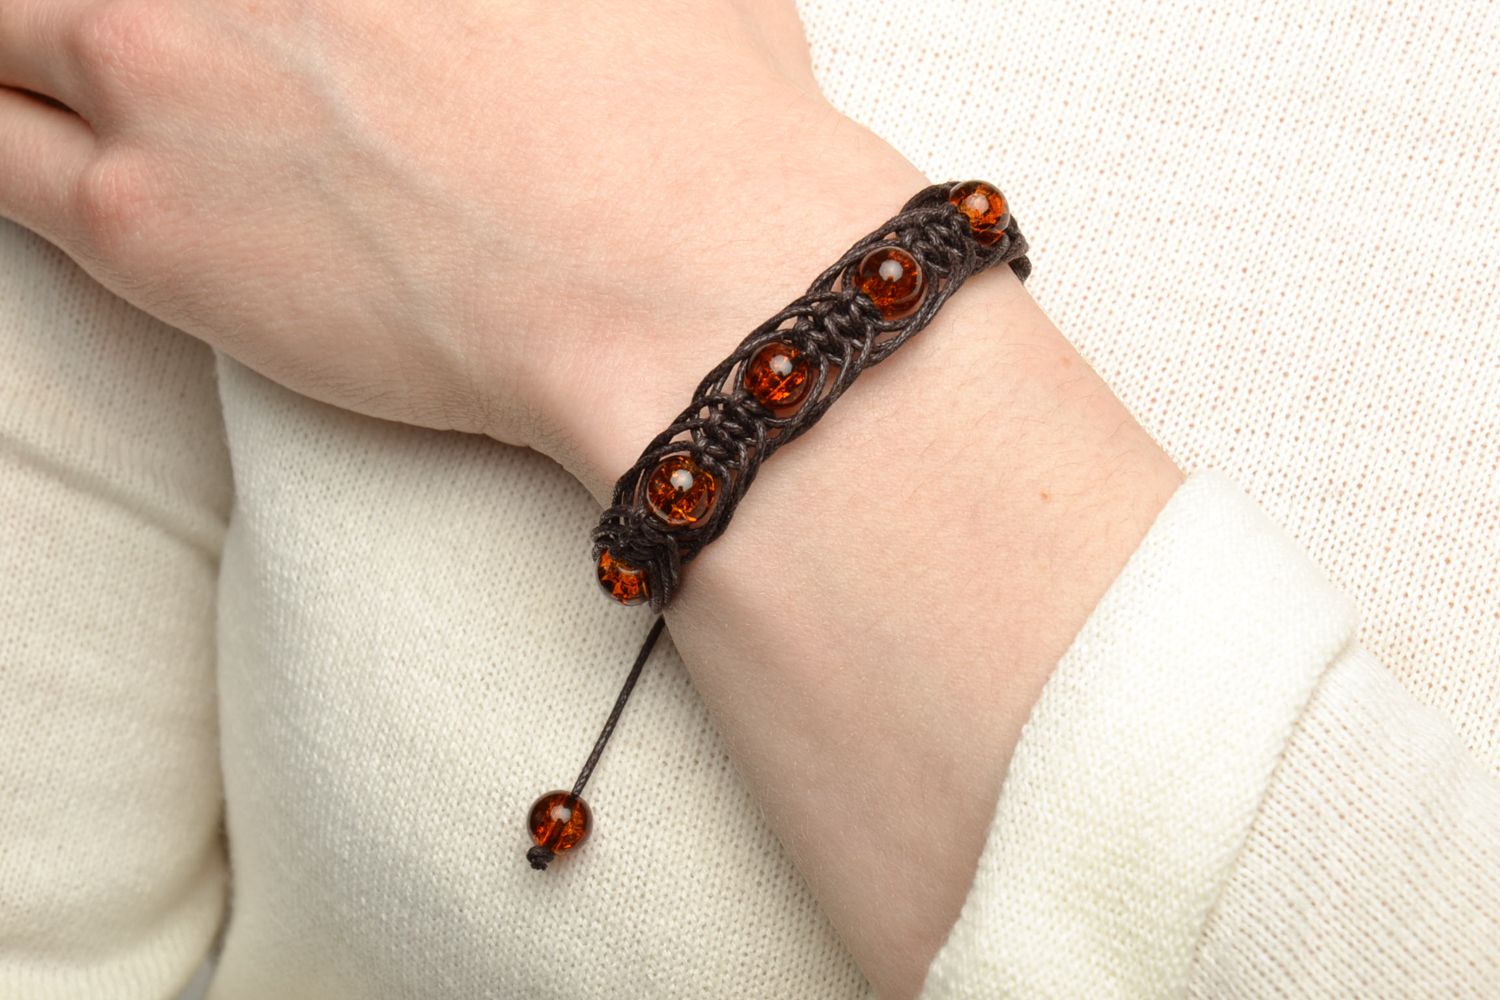 Bracelet with glass beads of amber color photo 5